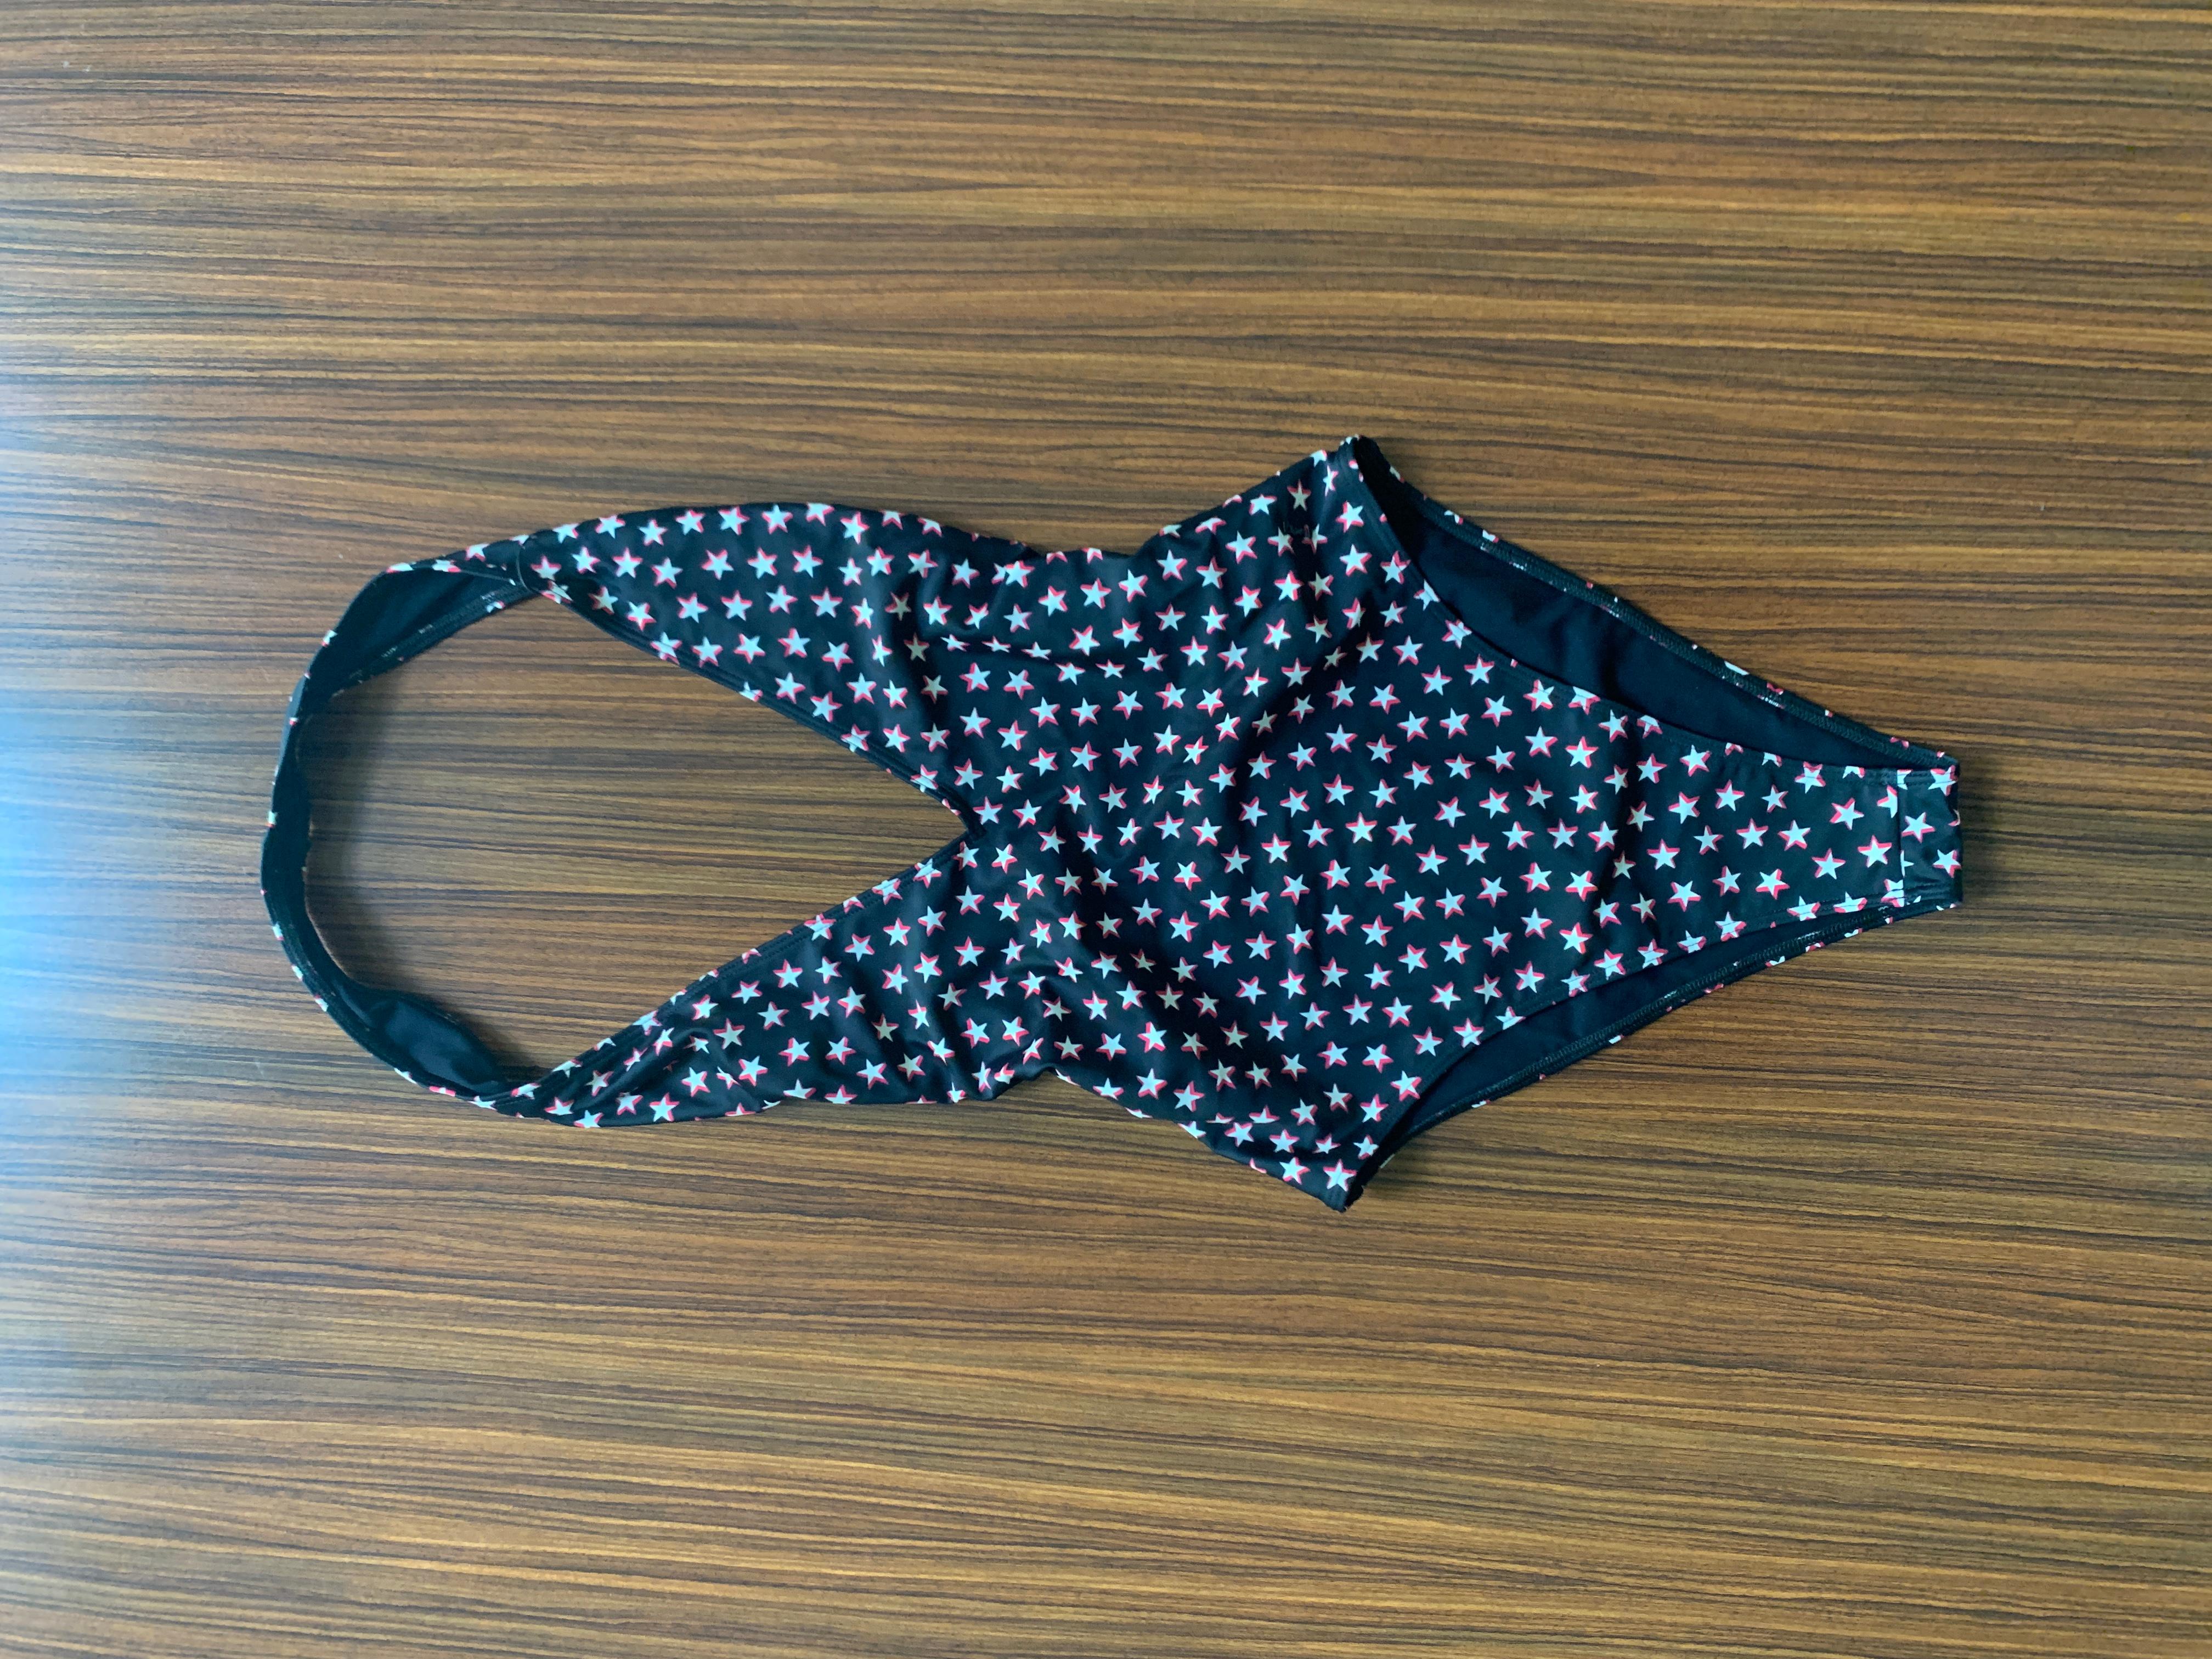 Yves Saint Laurent black one piece halter swimming suit with red and white star print throughout. Flattering high cut legs and low cut back. Small metal YSL logo at hip. 

82% polyamide, 18% spandex.

Made in Italy. 

Size XS.

Excellent condition,